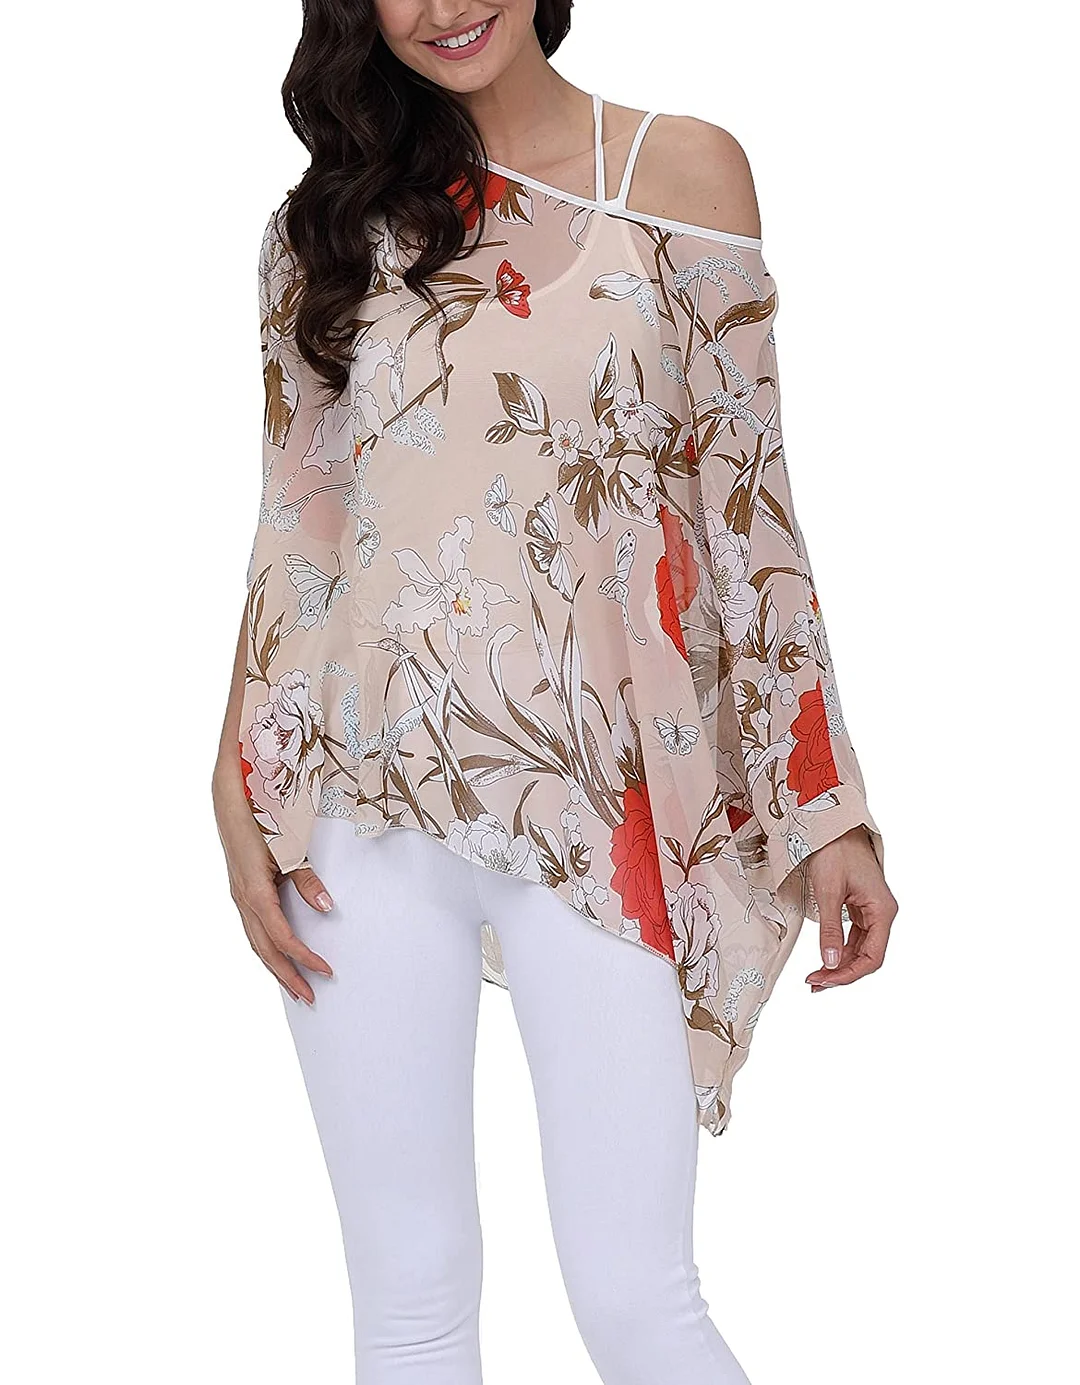 Women Stylish Summer Floral Printed Shirt Batwing Sleeve Top Chiffon Poncho Casual Loose Blouse with Shoulder Off